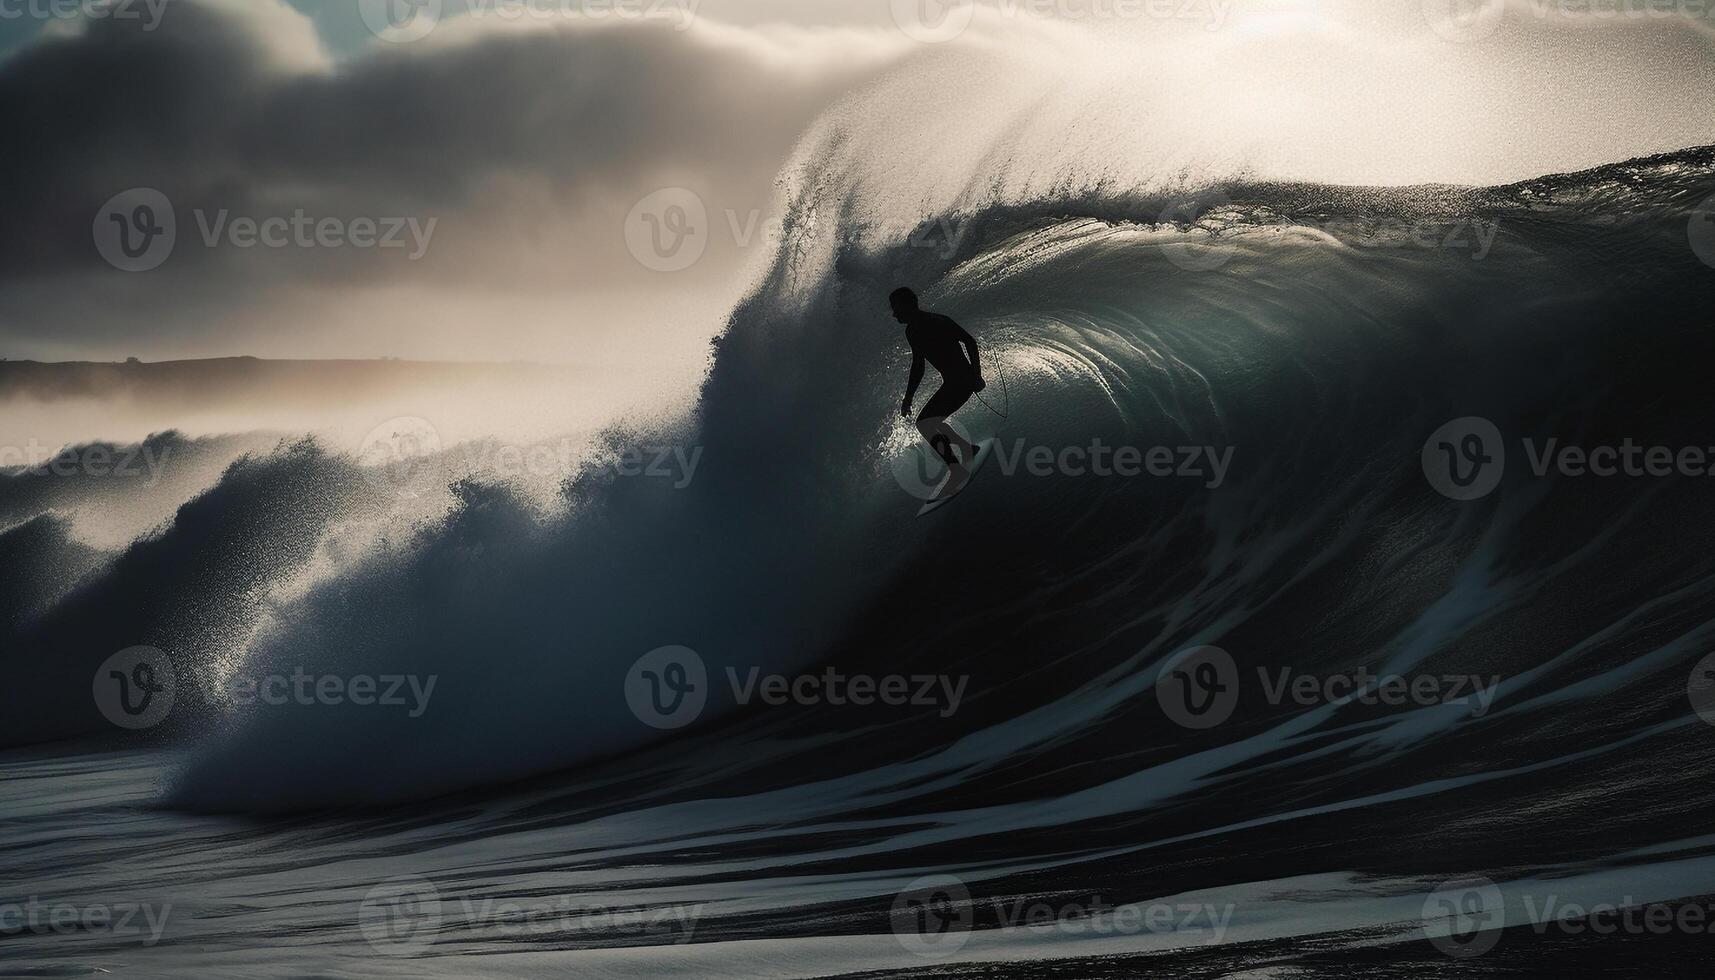 AI generated One person surfing, spraying water, enjoying the freedom of nature generated by AI photo